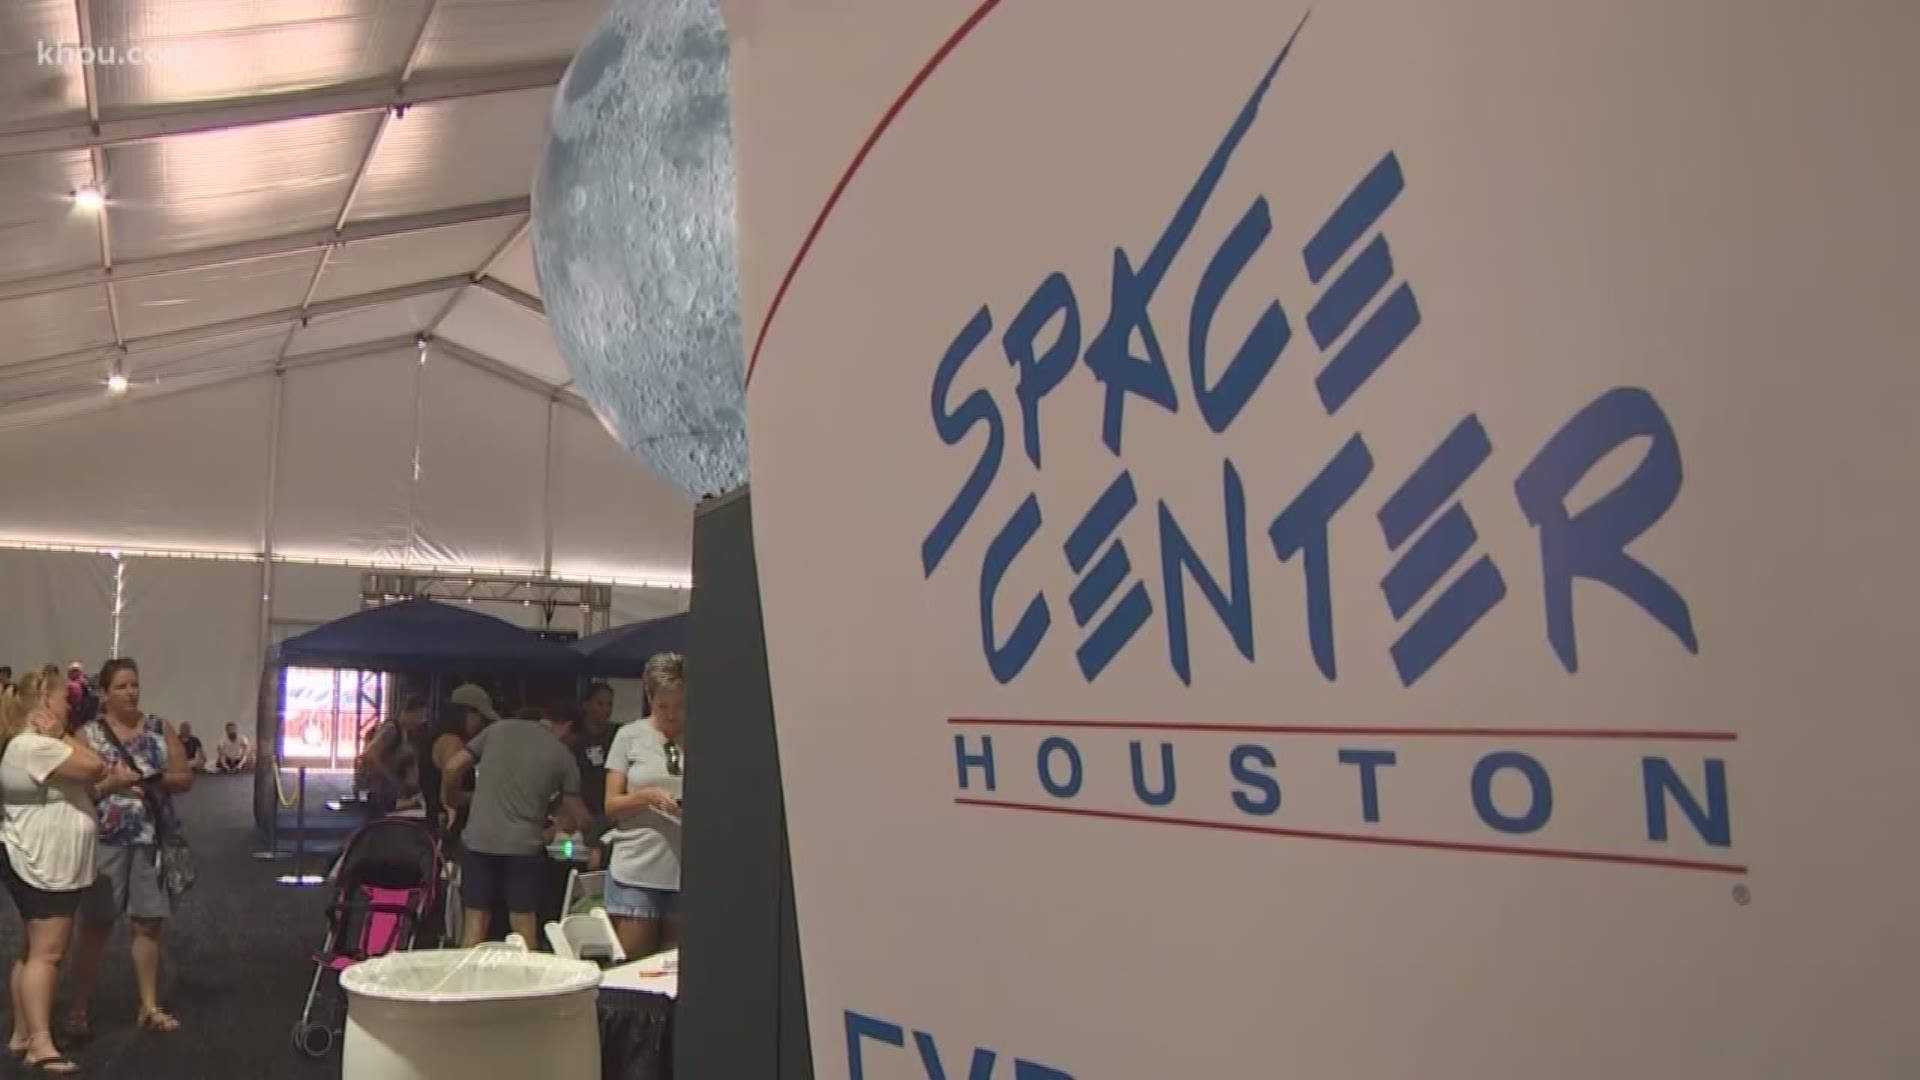 Space Center Houston is prepping for the largest event in its history. 10,000 to 20,000 people are expected to celebrate the 50th anniversary of the moon landing at the center Saturday.